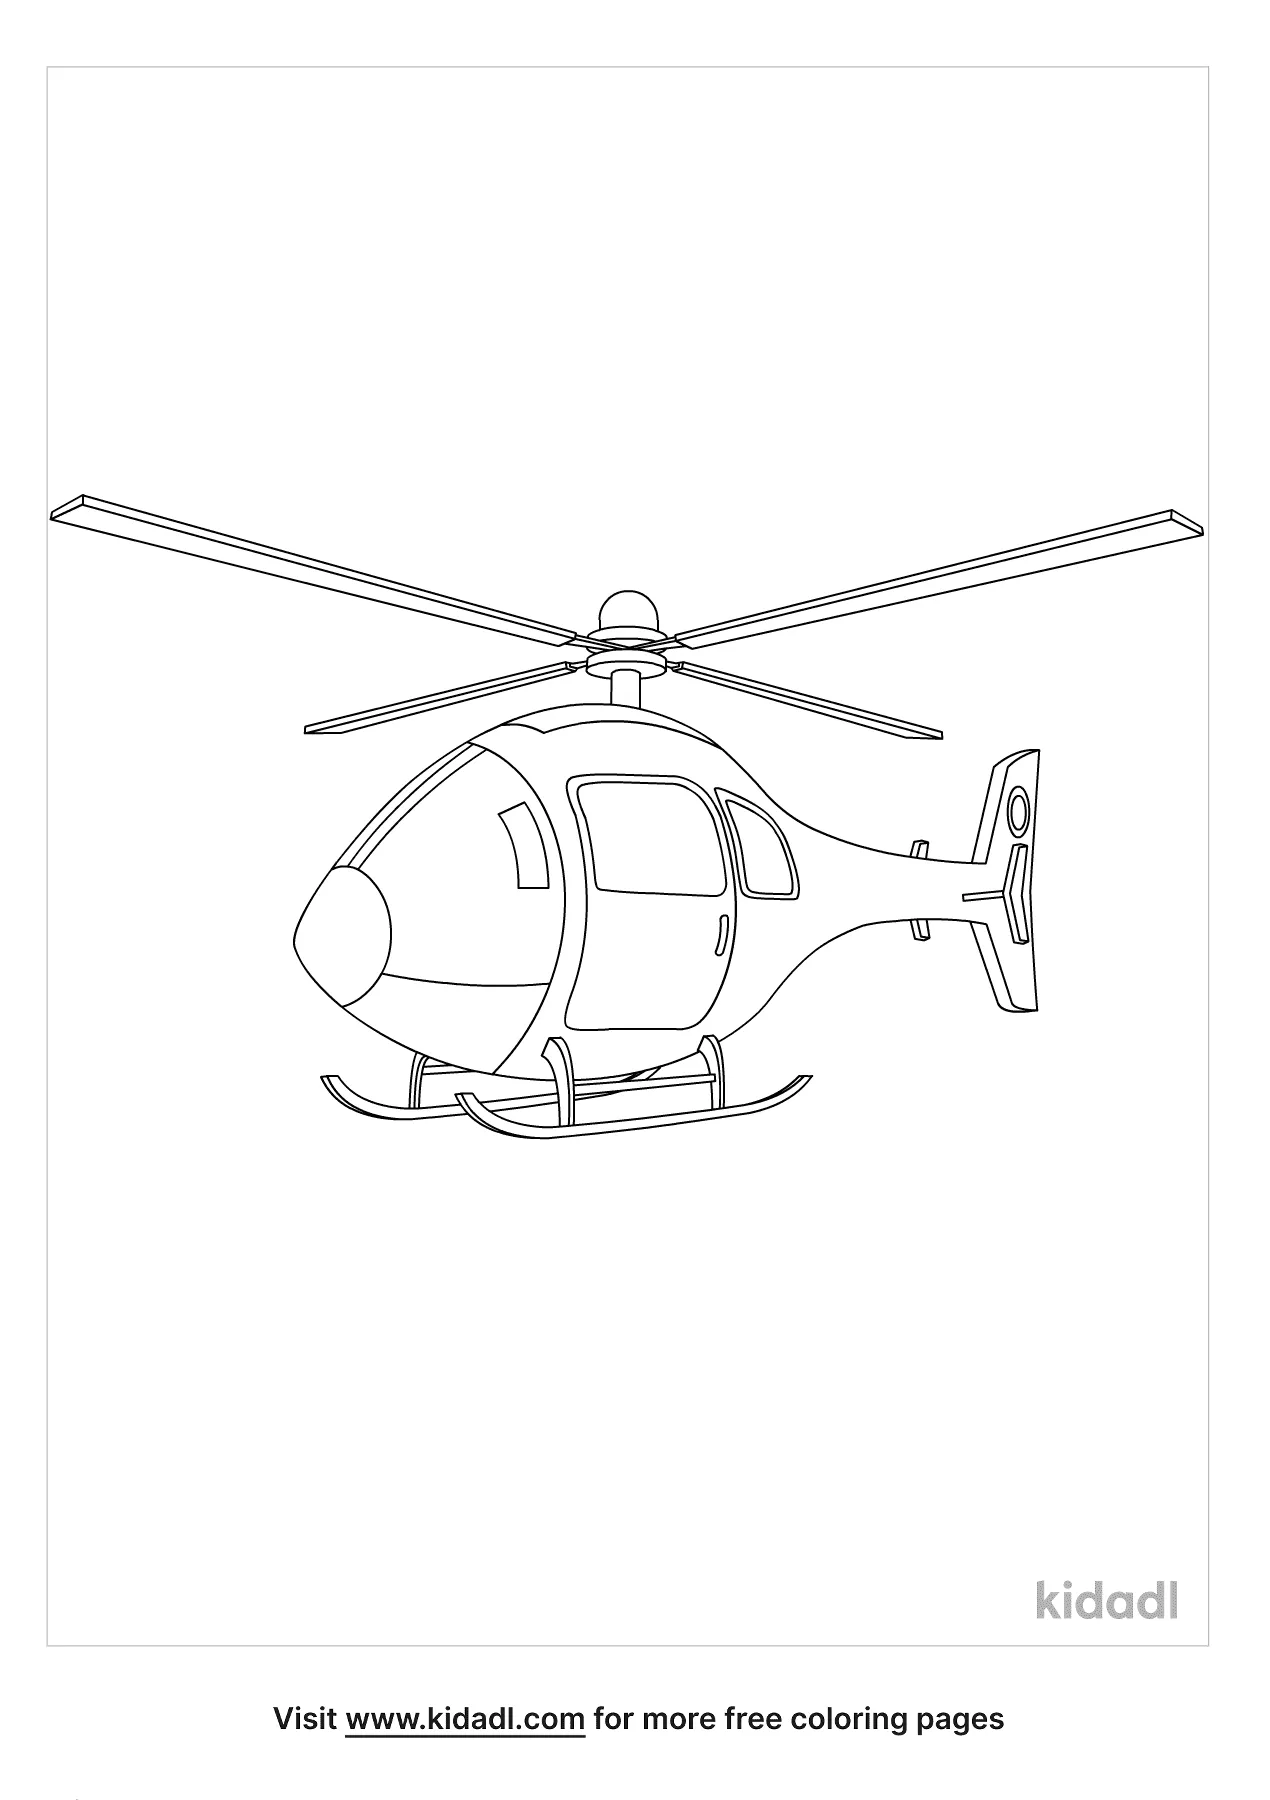 Helicopter Coloring Pages   Free Vehicles Coloring Pages   Kidadl